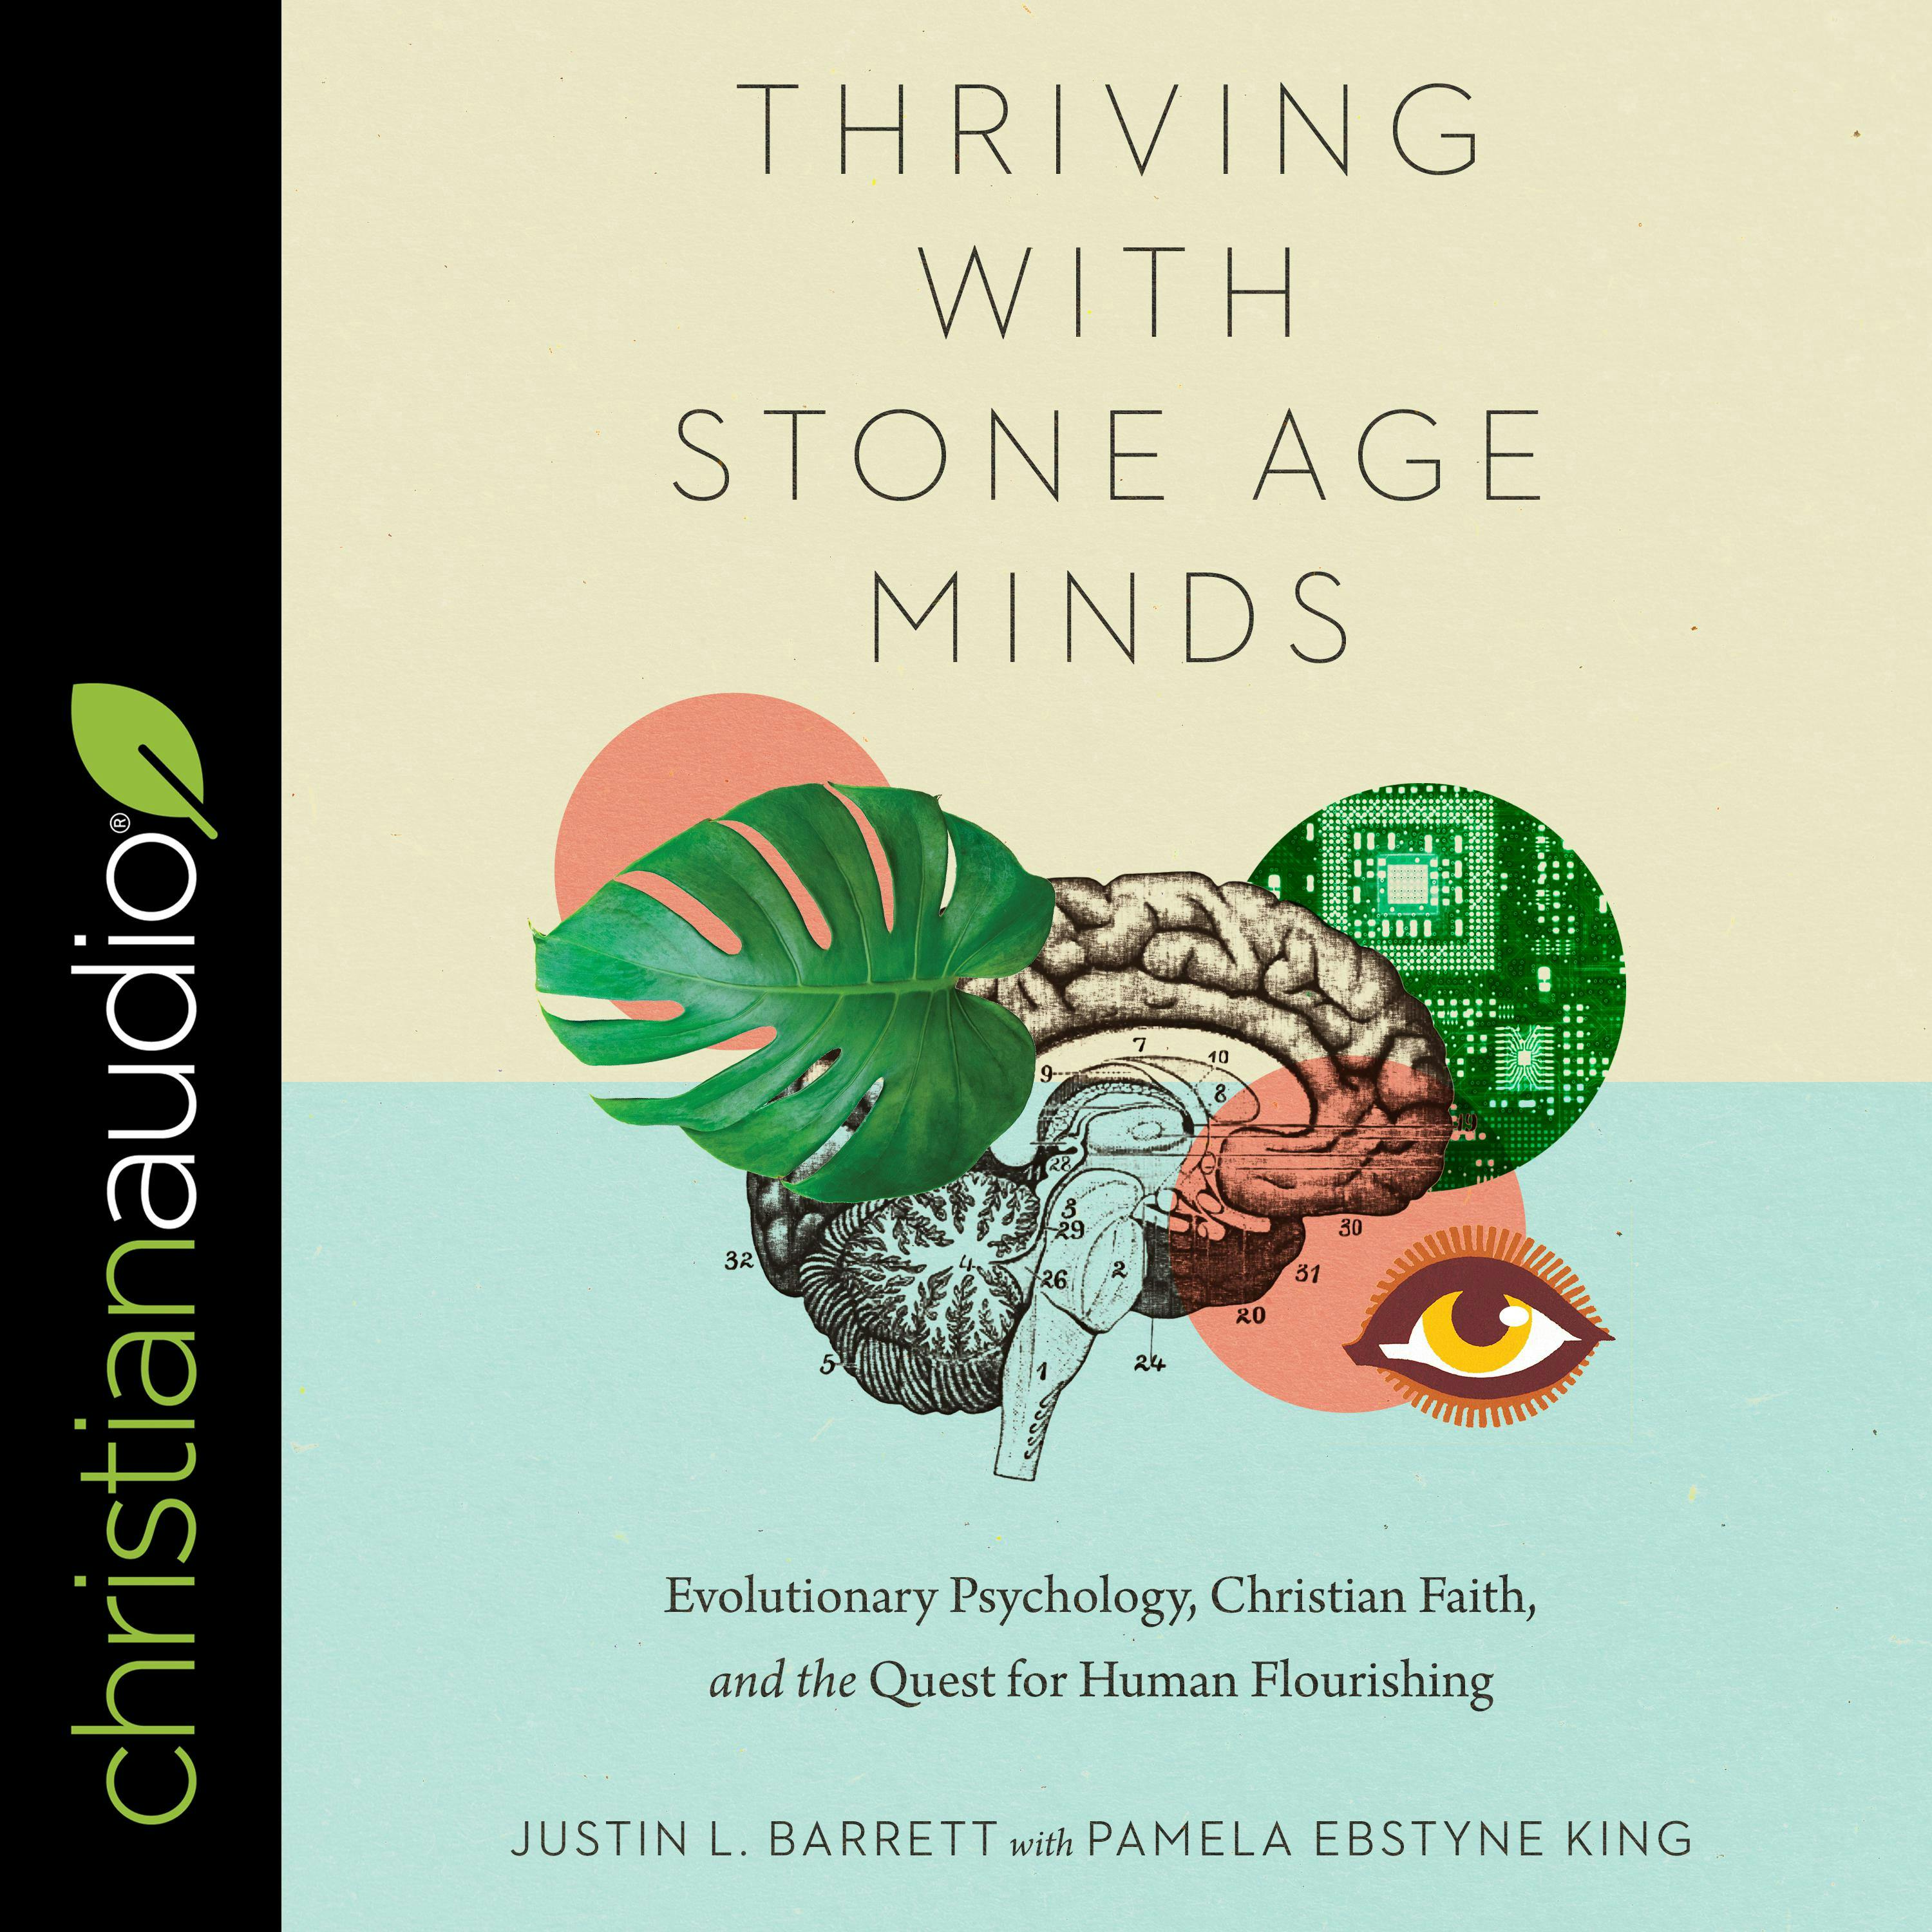 Thriving with Stone-Age Minds: Evolutionary Psychology, Christian Faith, and the Quest for Human Flourishing - Justin L. Barrett, Pamela Ebstyne King